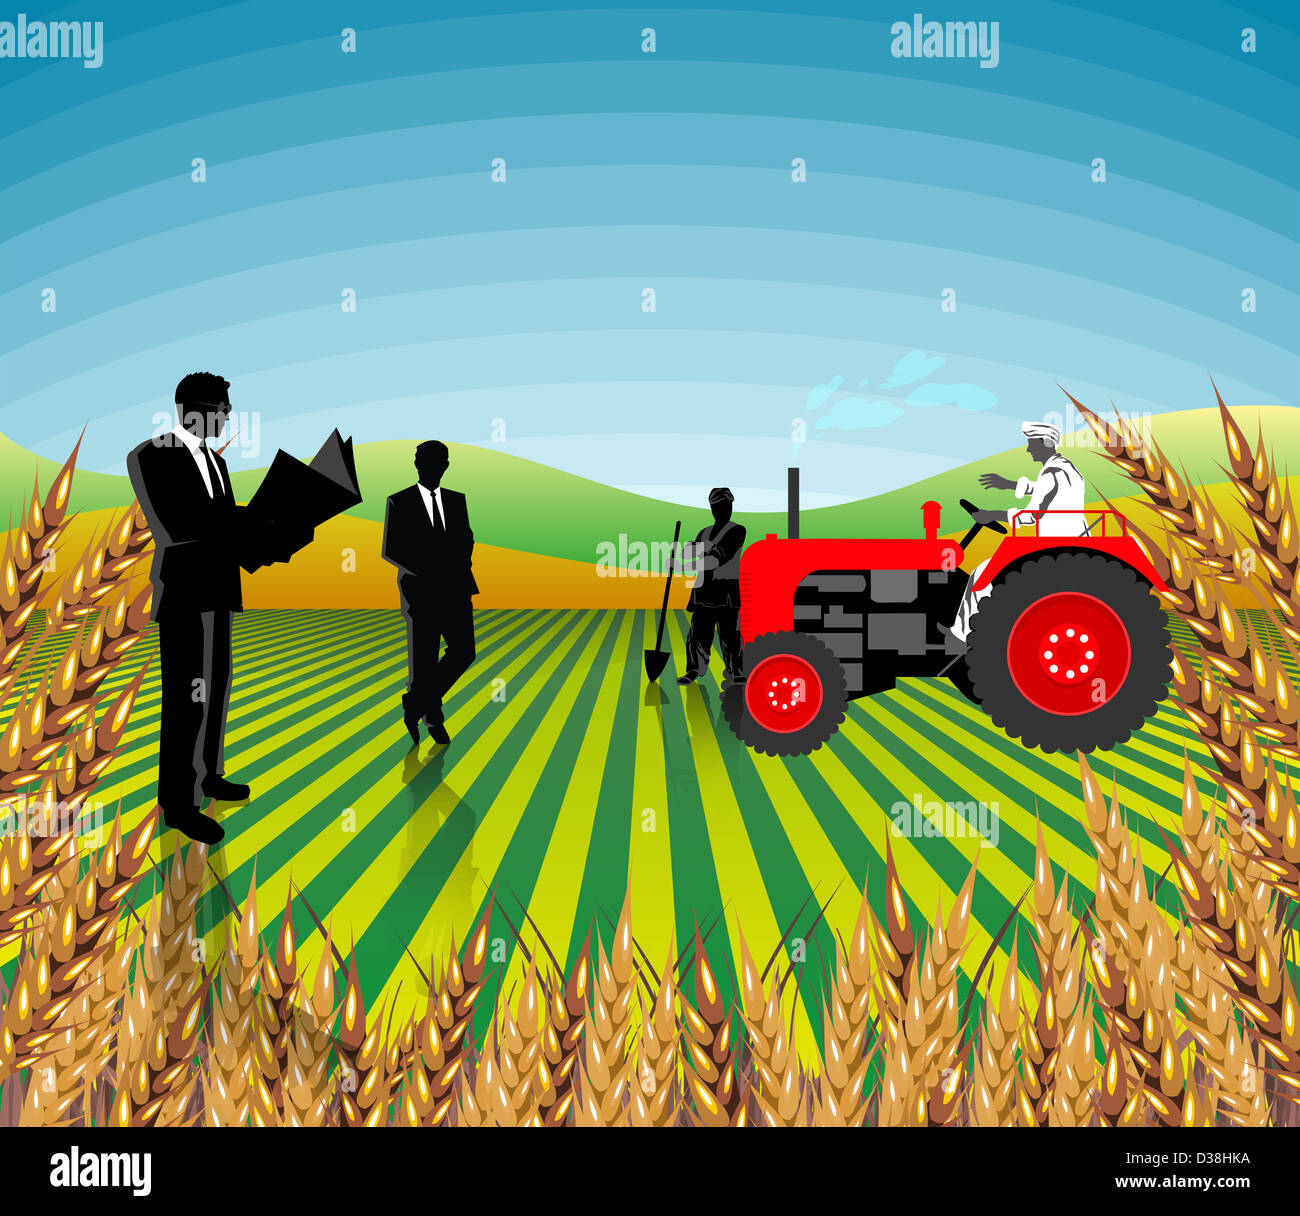 Businessmen and farmers in a field, India Stock Photo